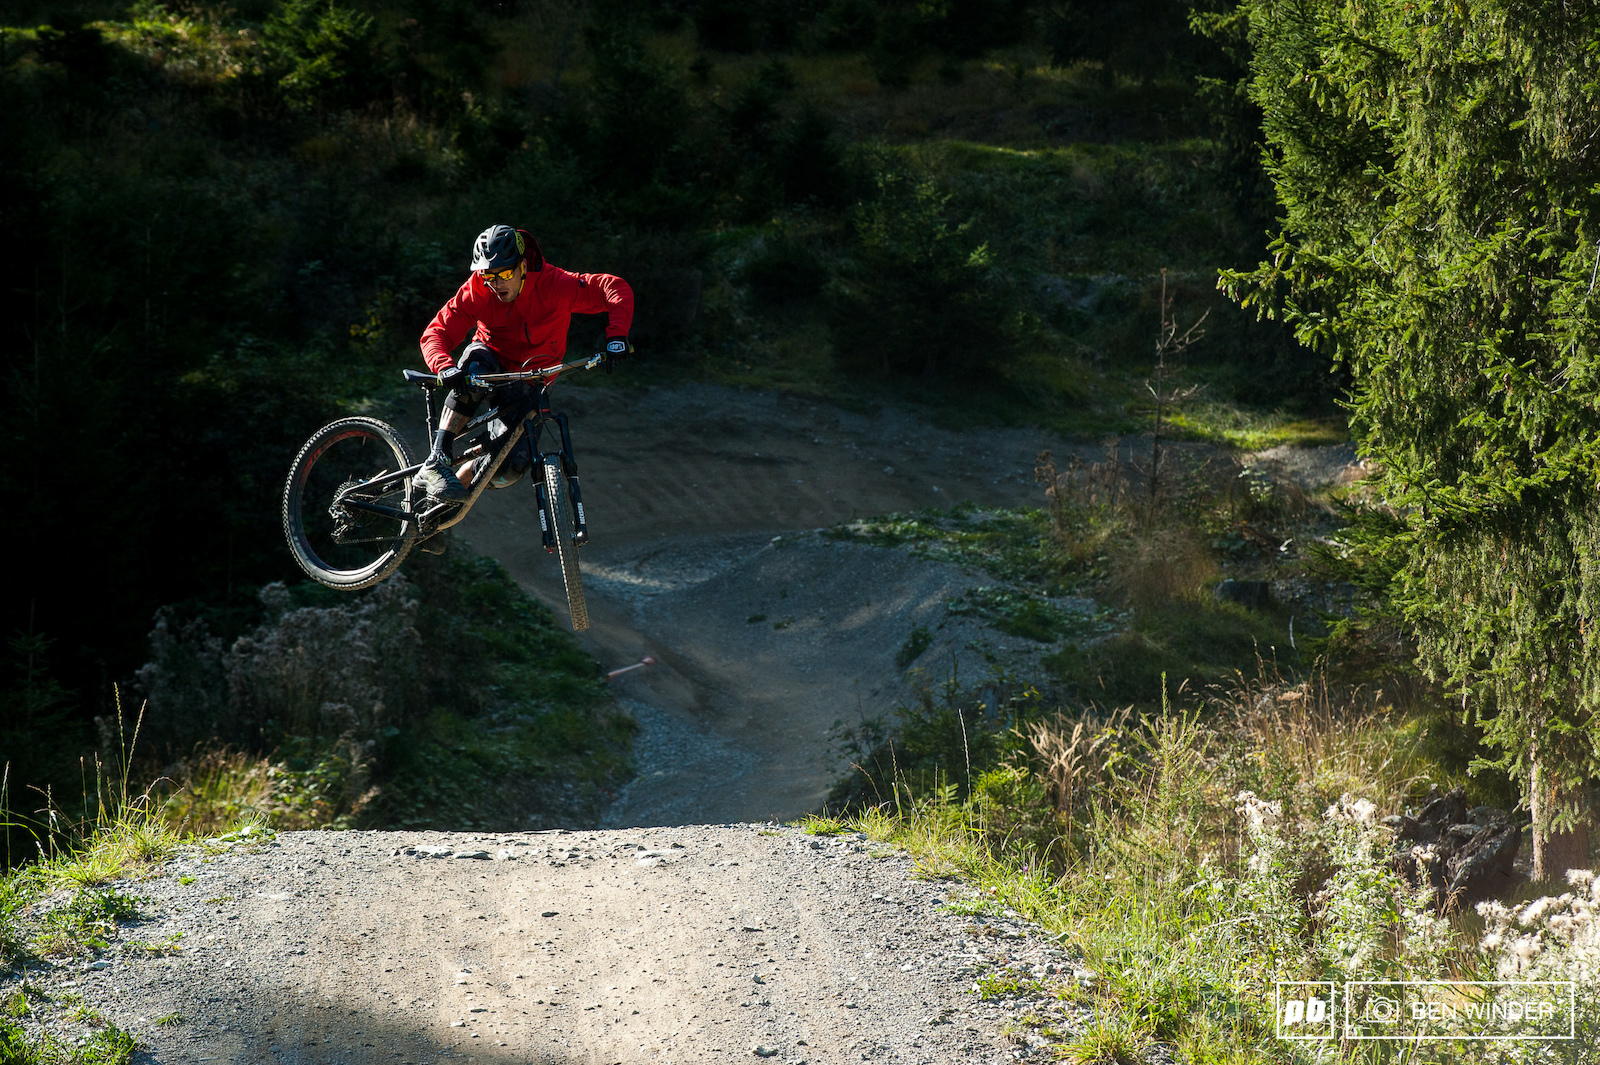 Jure getting it sideways on one of the jumps.